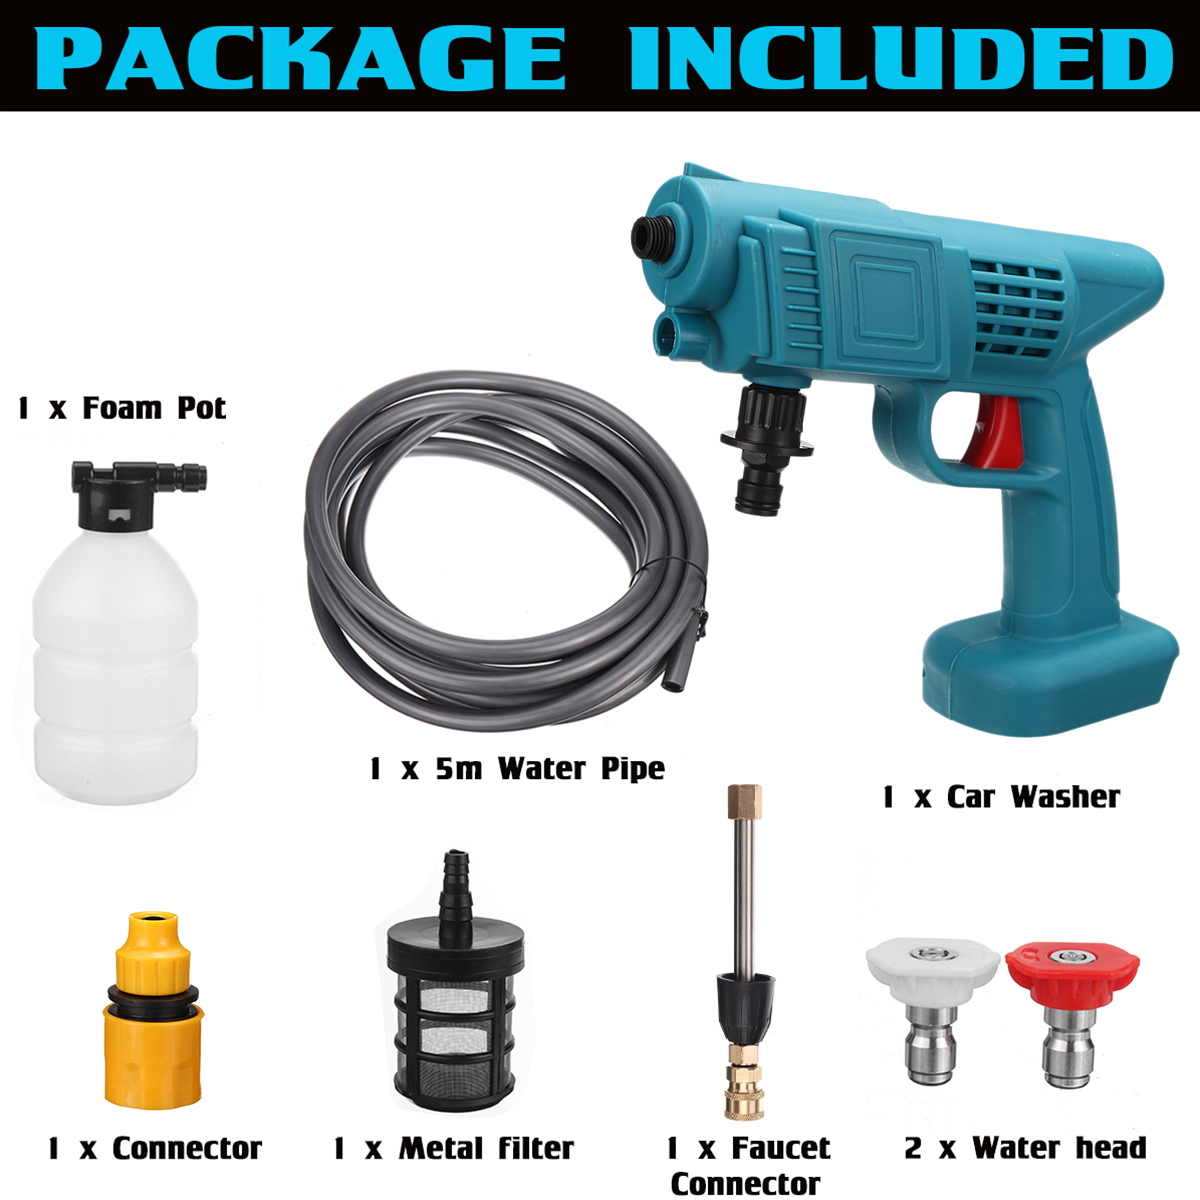 24V-600W-Portable-Cordless-Car-Washer-High-Pressure-Car-Household-Washer-Cleaner-Spray-Guns-Pumps-To-1901471-10